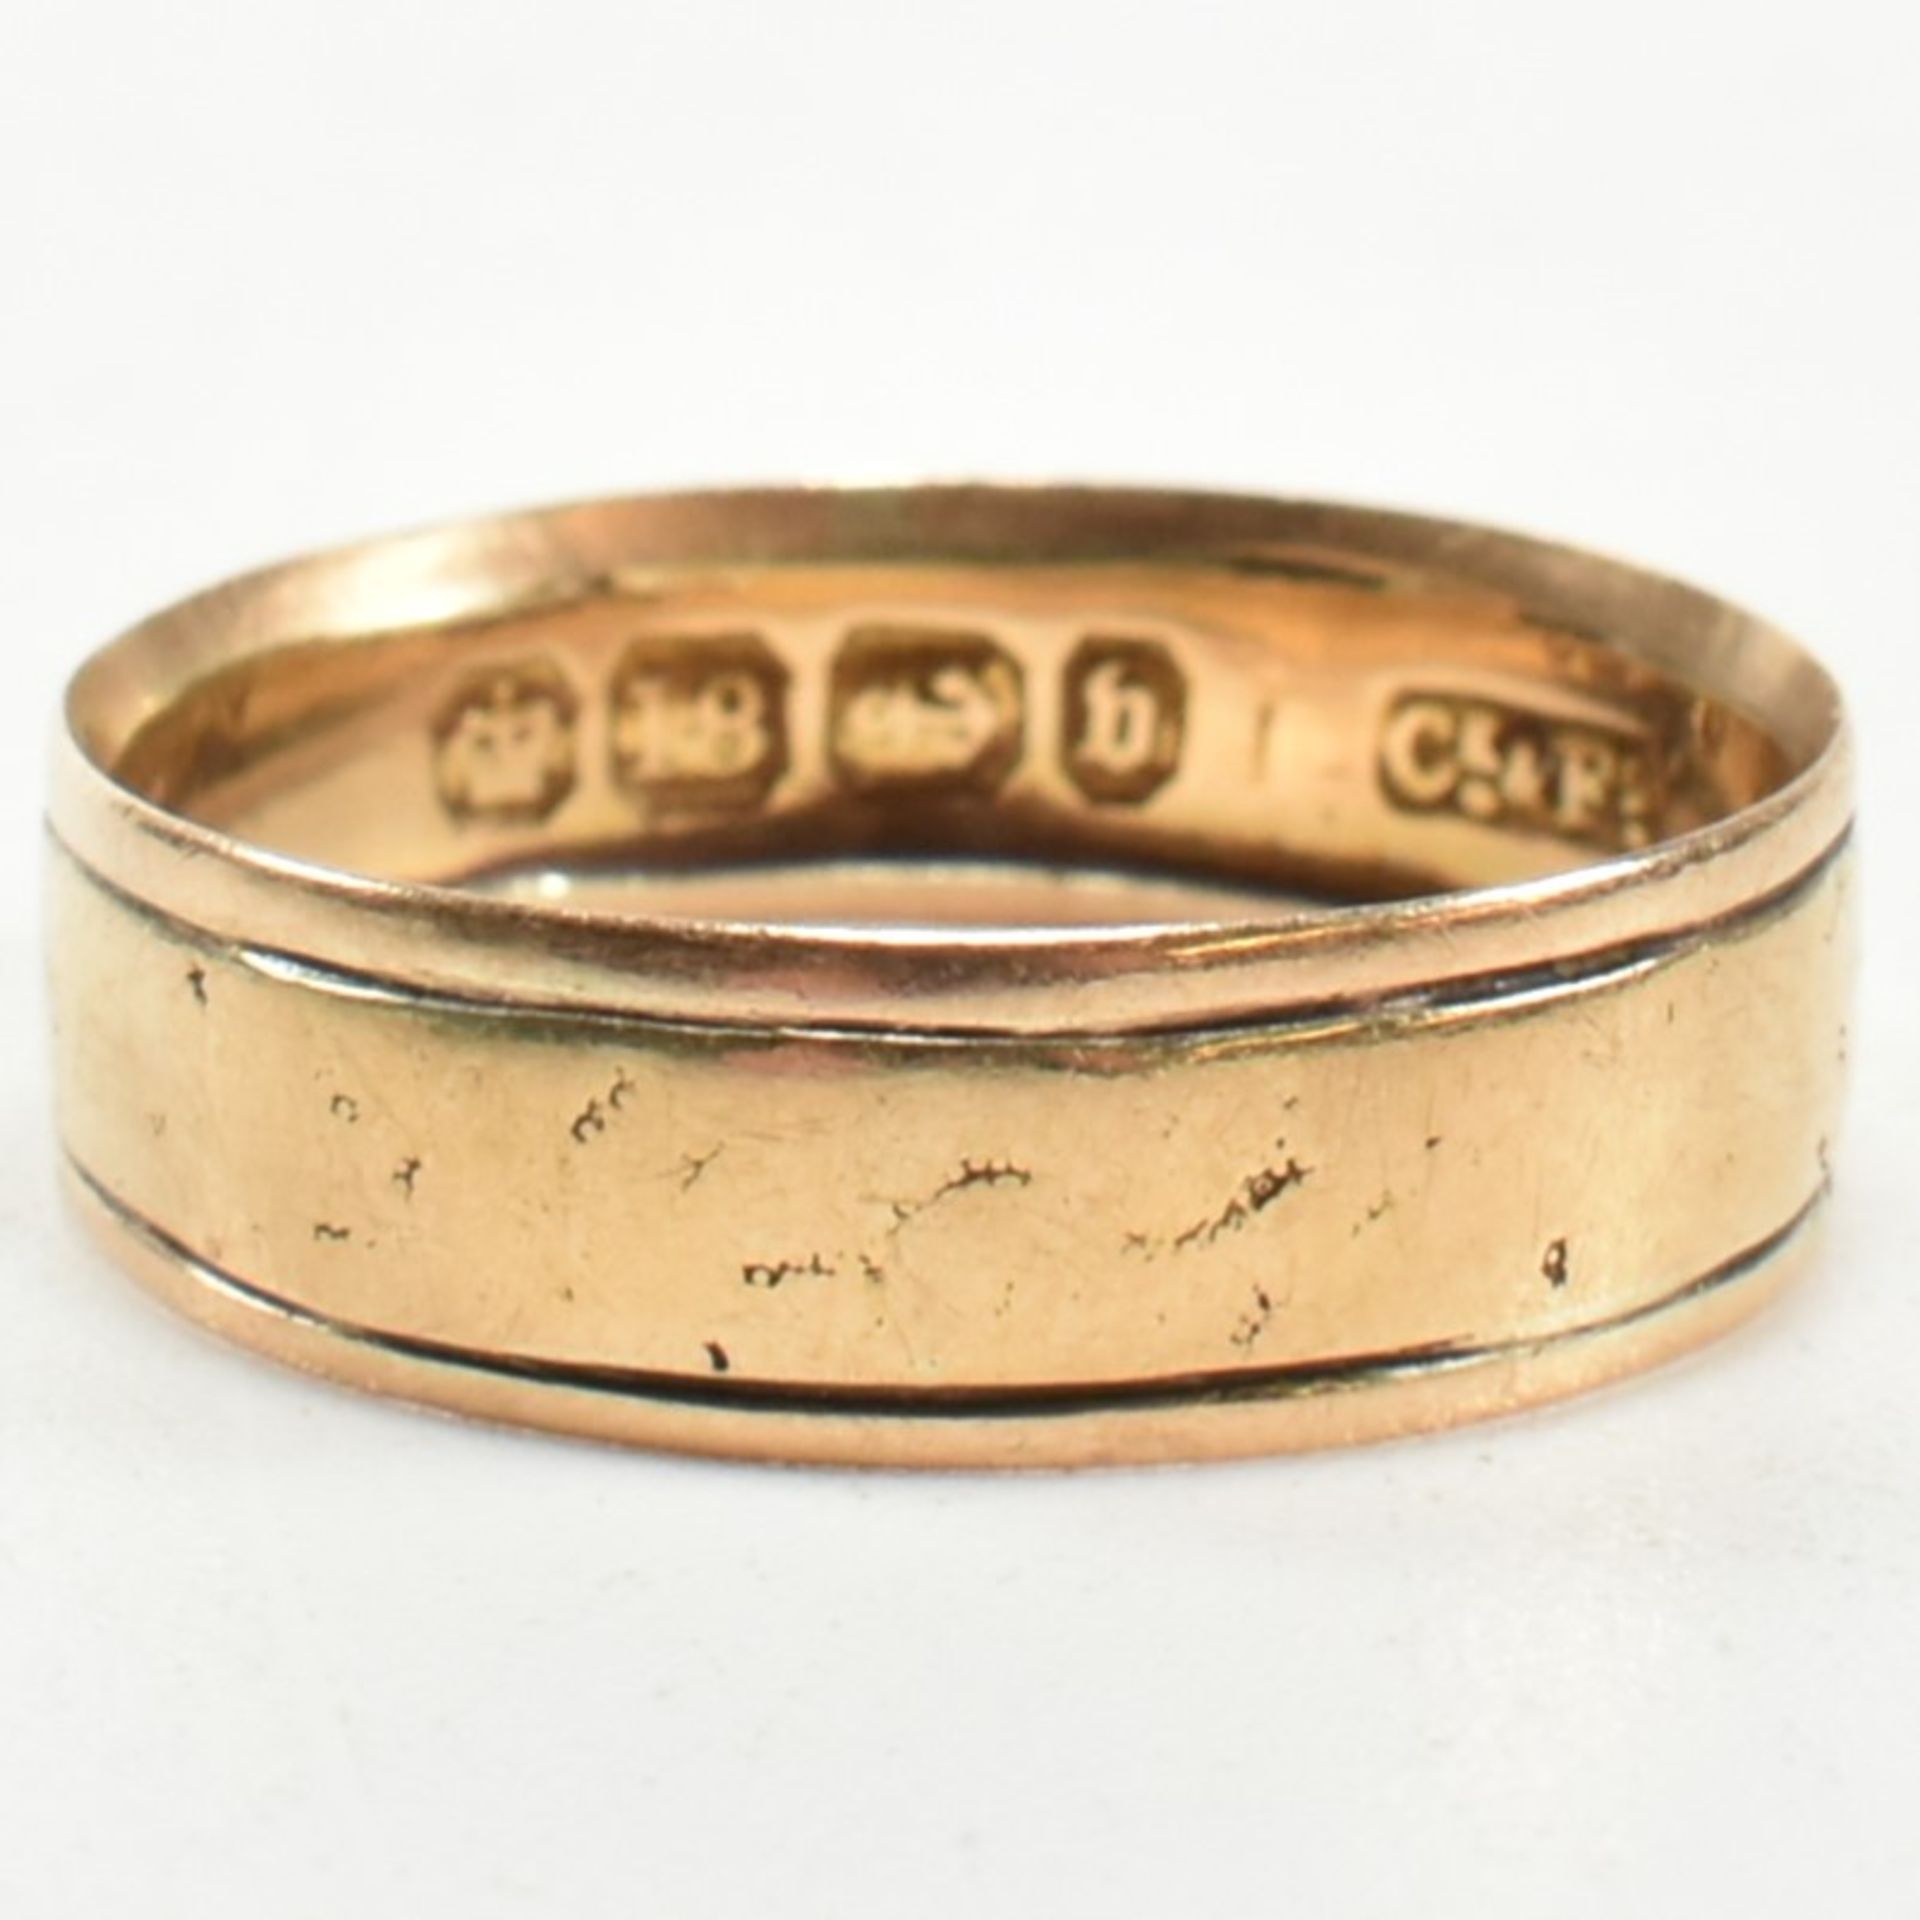 VICTORIAN HALLMARKED 18CT GOLD BAND RING - Image 3 of 4